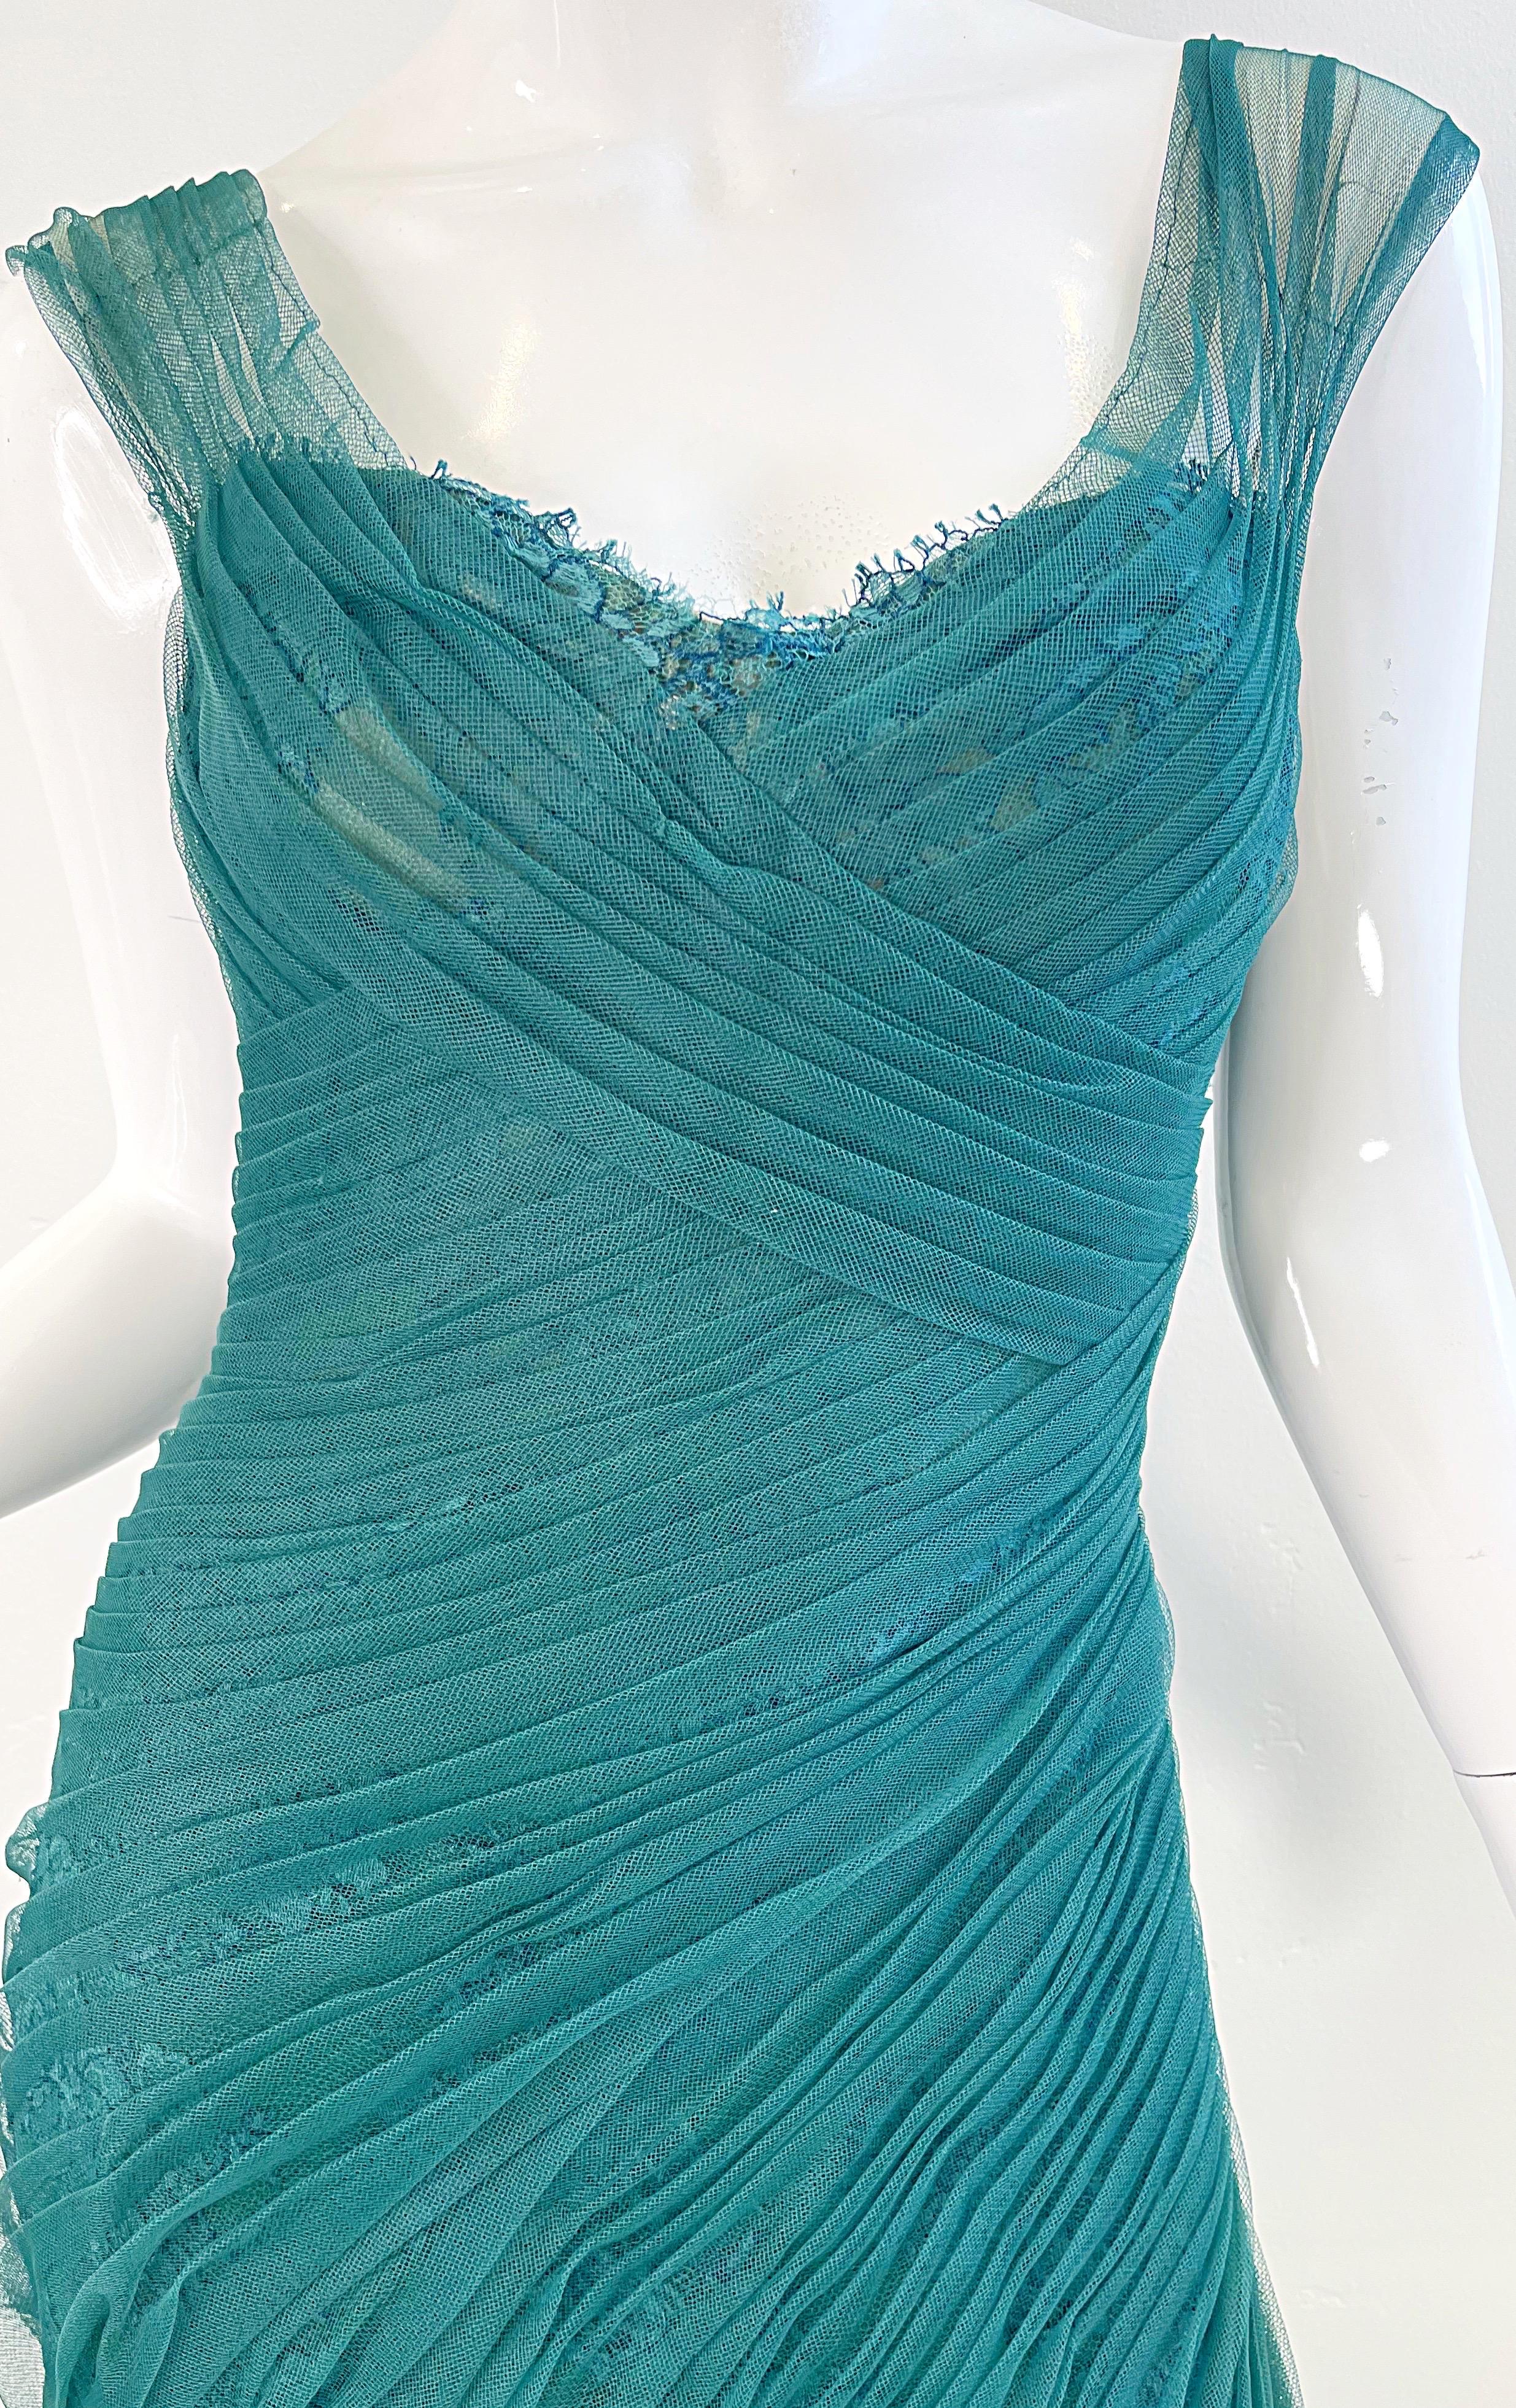 NWT Monique Lhuillier Runway Spring 2013 Size 4 Emerald Green Lace Gown Dress For Sale 1